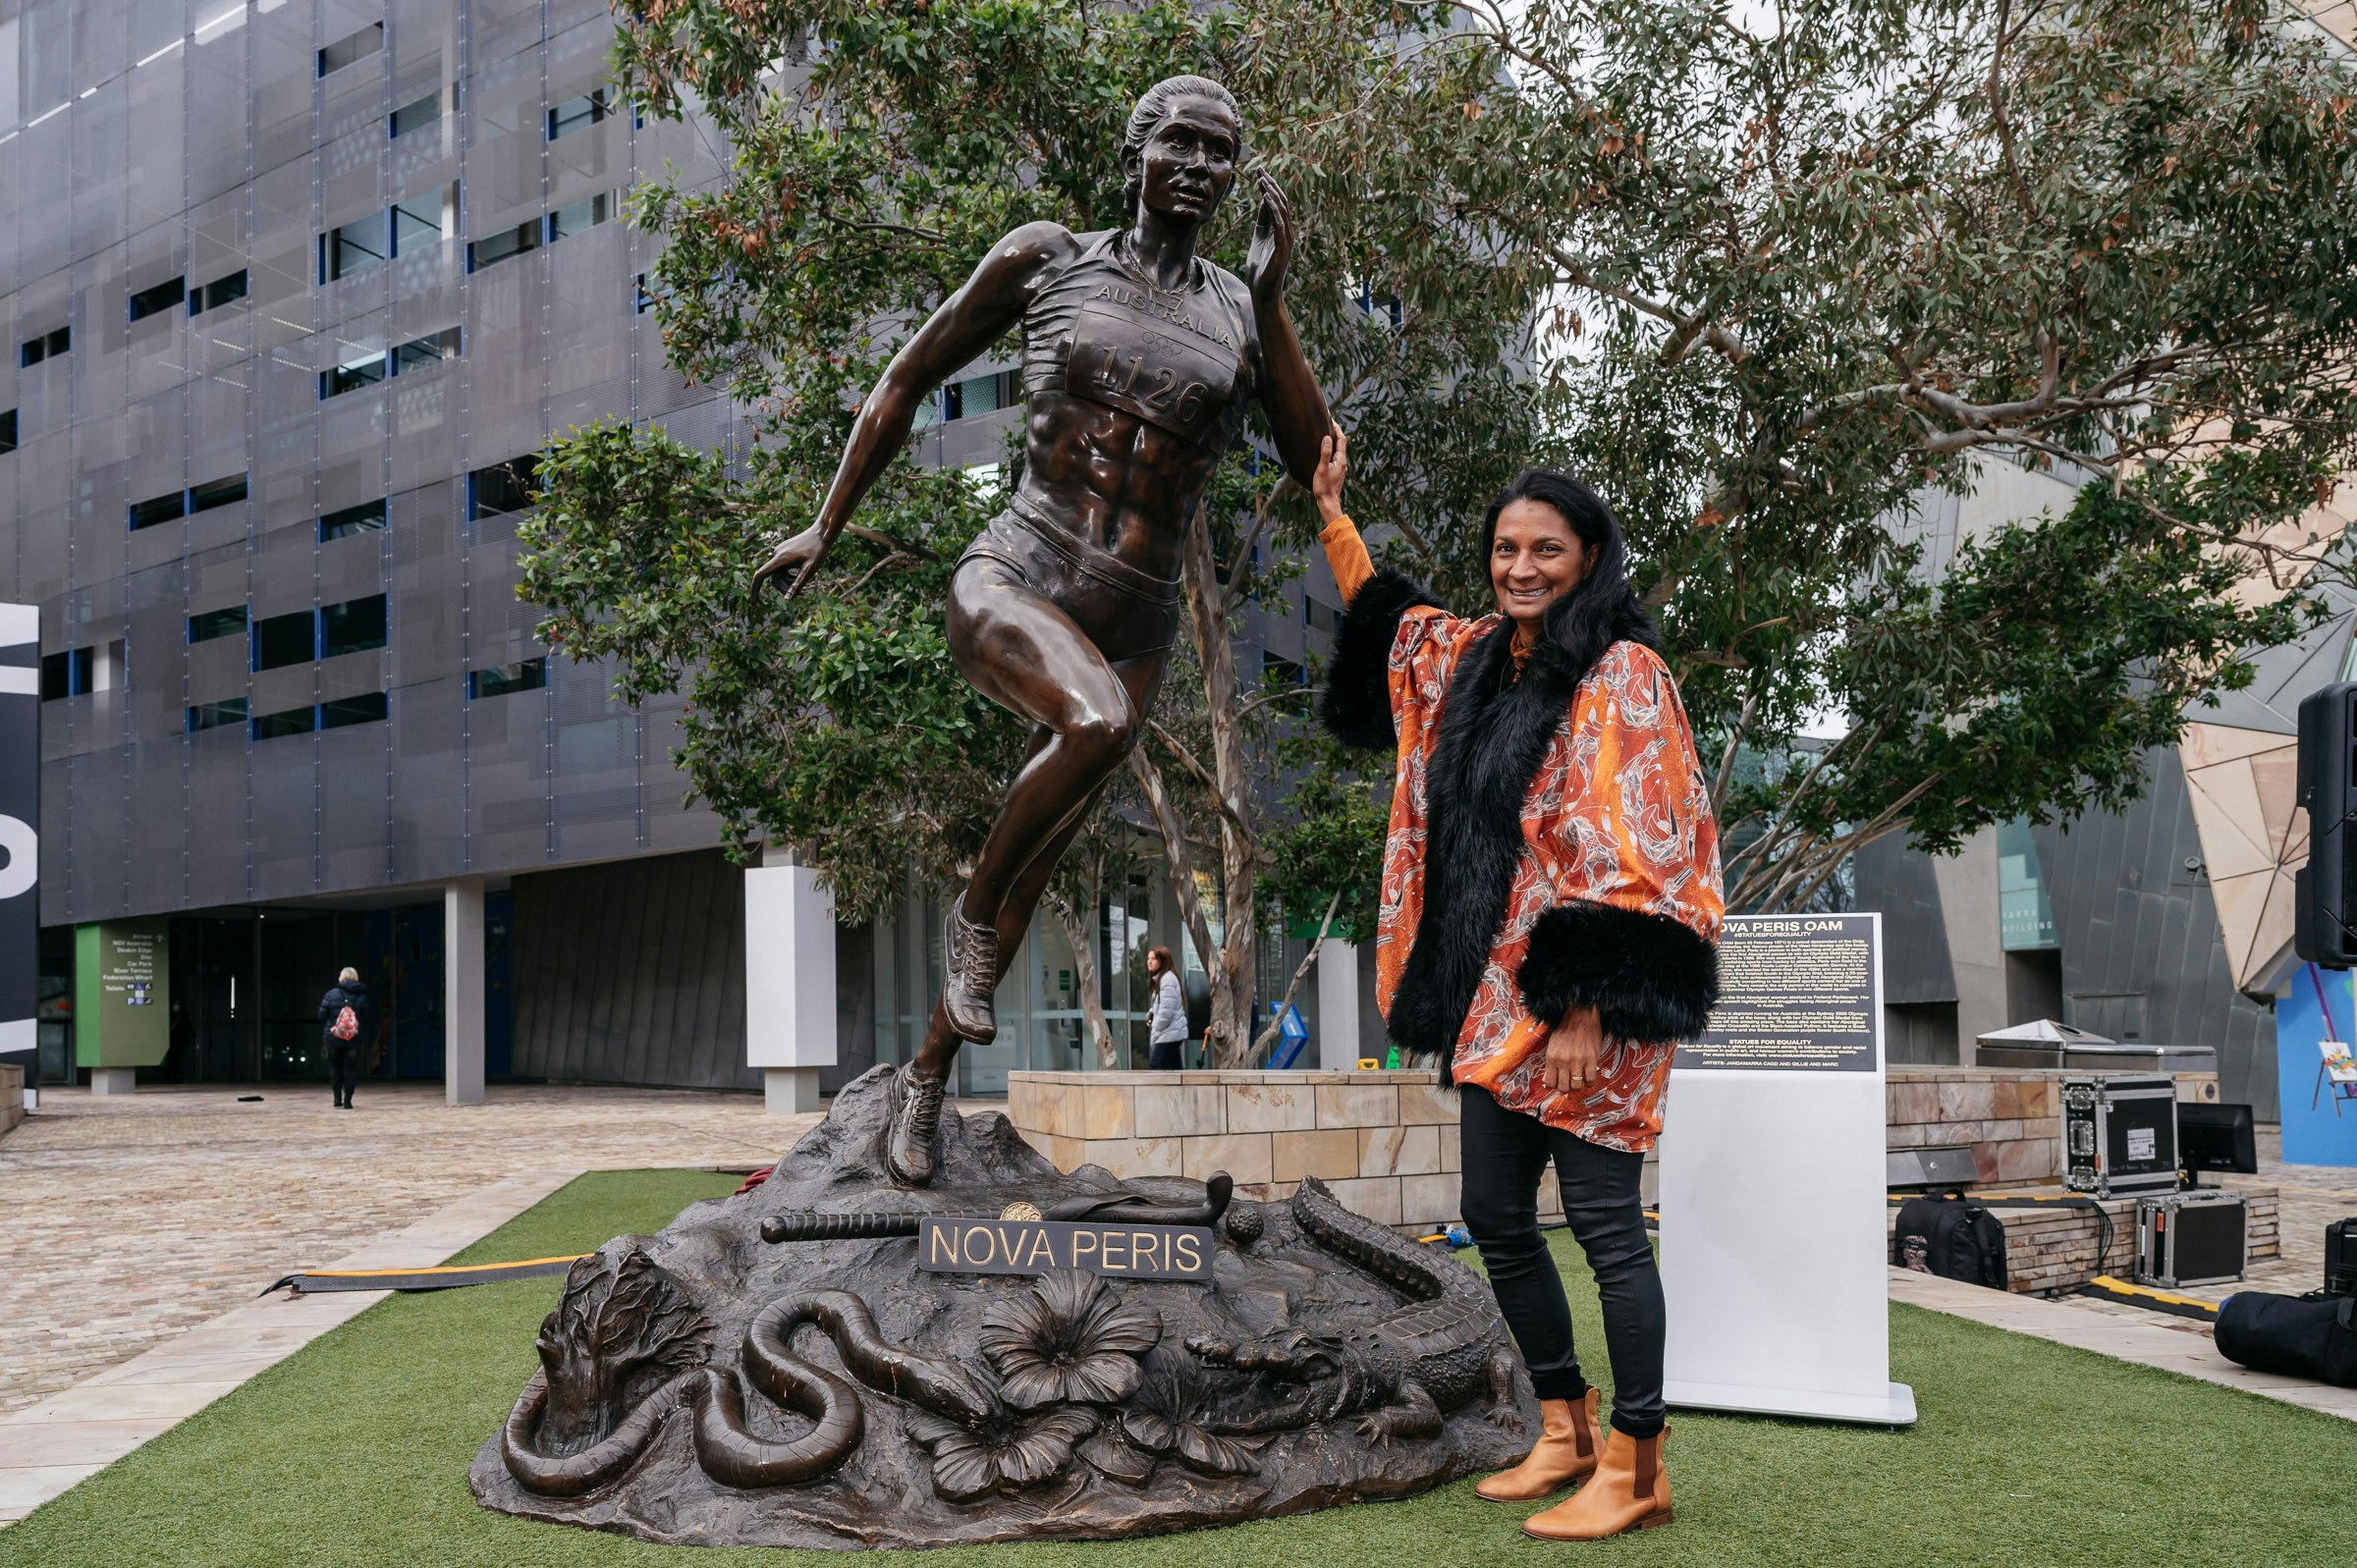 Nova Peris unveiling her bronze statue of her running at the Olympics in Fed Square